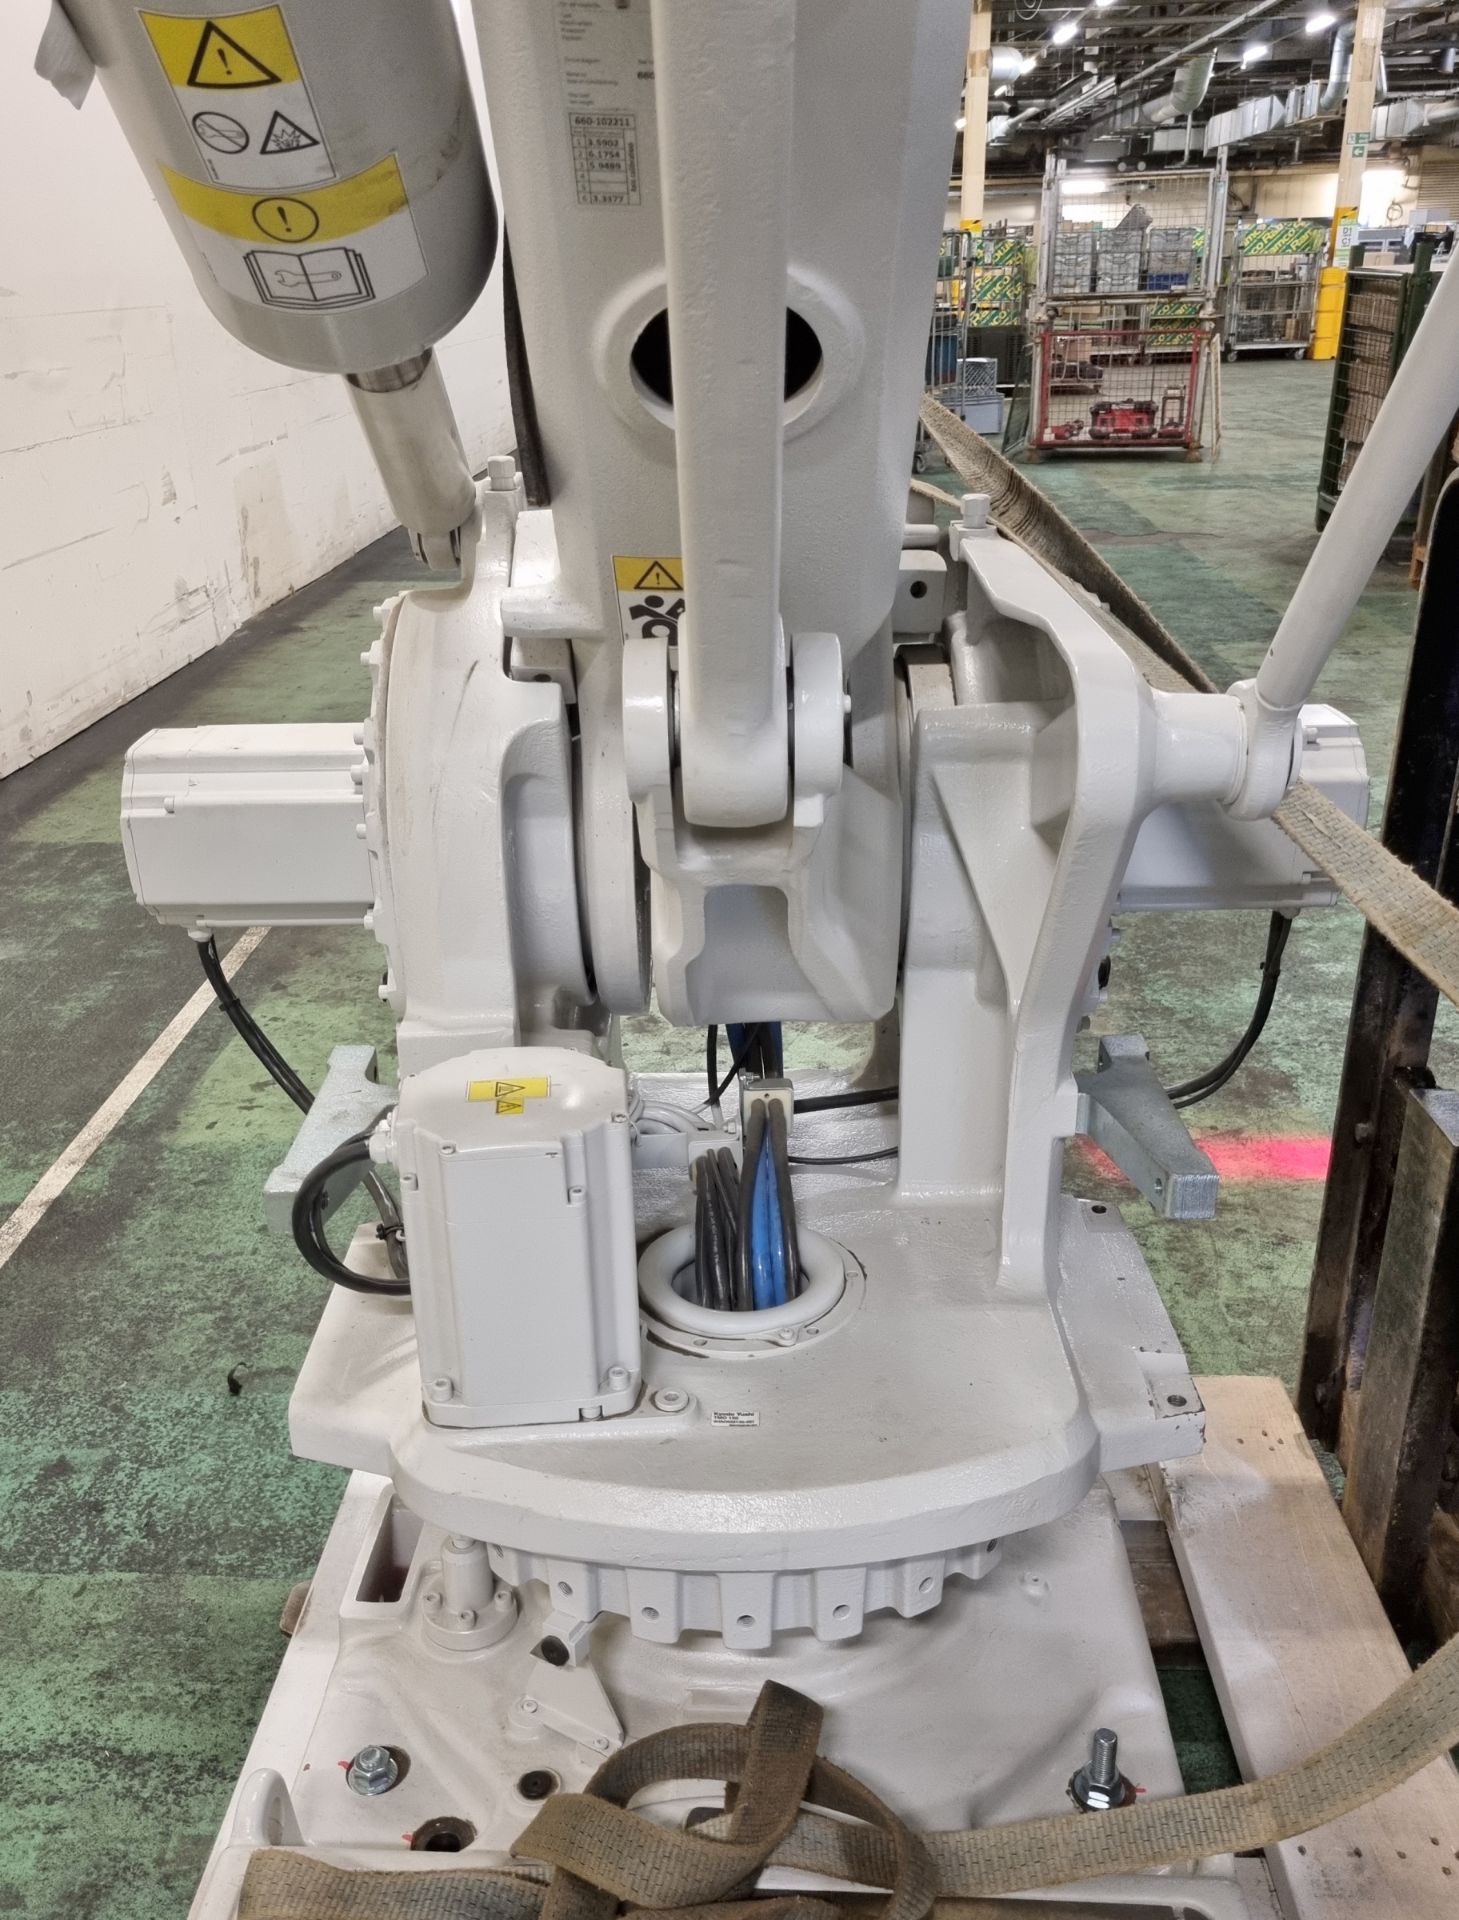 ABB AB IRB 660 4 axis articulated robot arm with ABB IRC5 Single robot control panel - Image 19 of 55